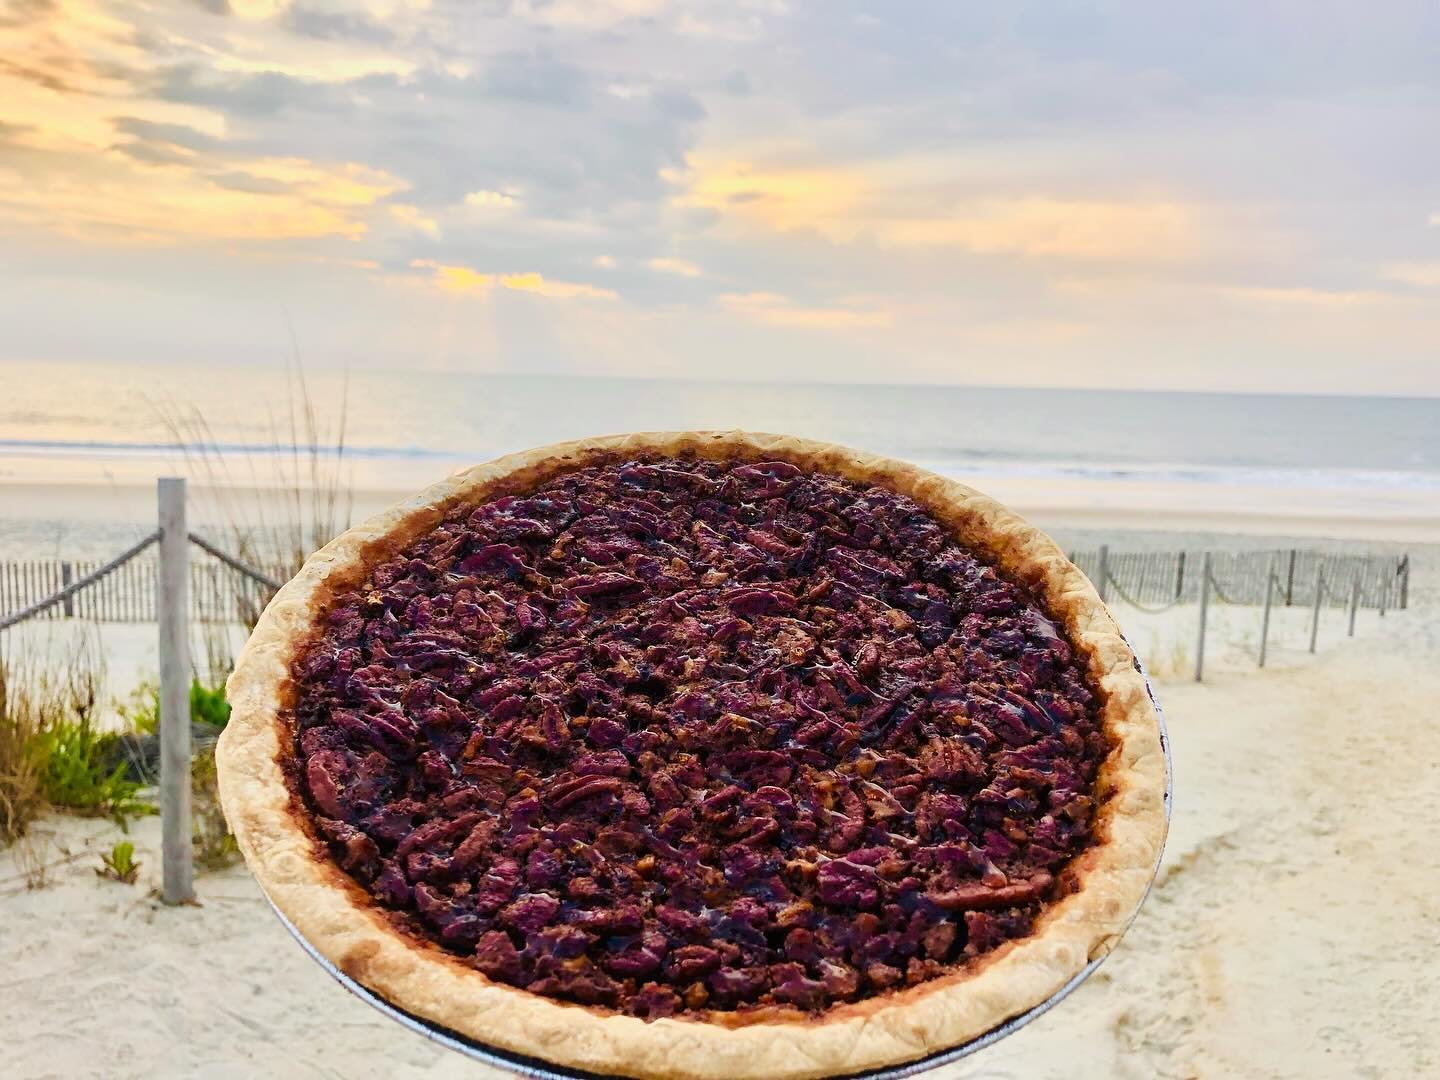 Our famous Whole Sedona Pecan Pie. Southern Style. Caramel Drizzle. Made in house. Available for purchase on our website and for pick-up at Sedona between 5:00pm - 7:00pm. Our address is 26 N Pennsylvania Ave Bethany Beach, DE 19930